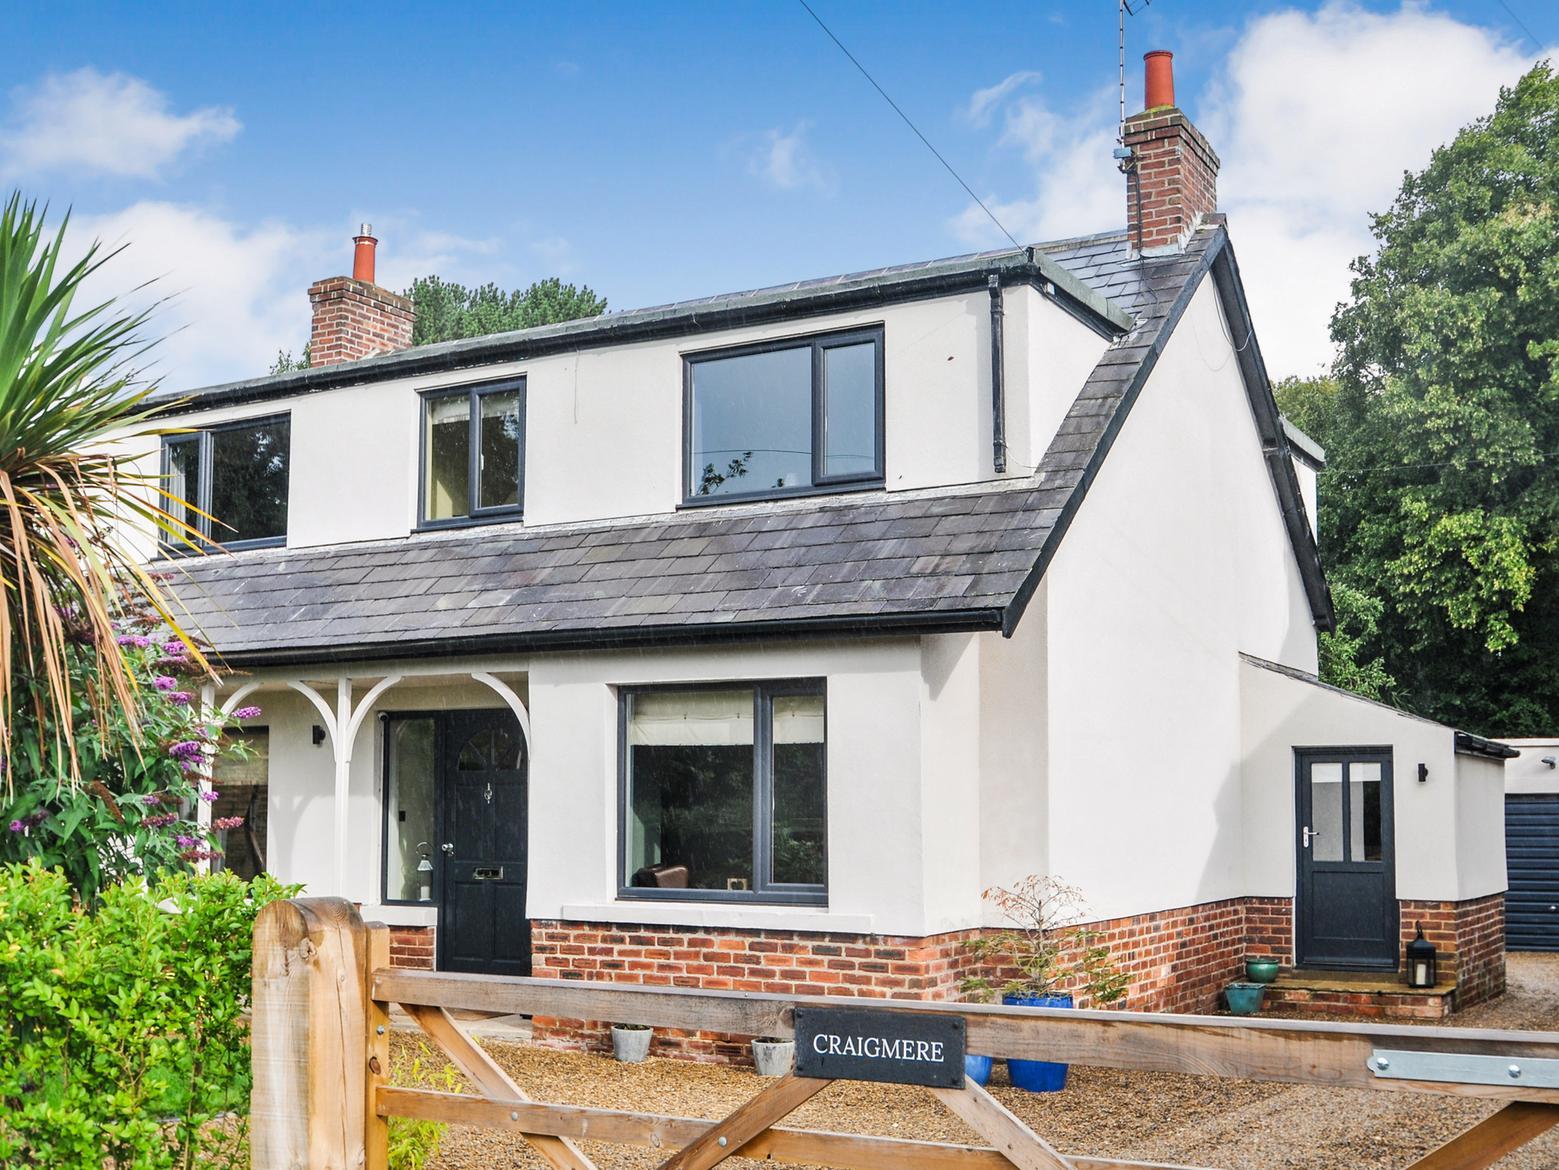 A superb detached property providing significantly improved and well presented family accommodation with a good sized private lawned garden to the rear.